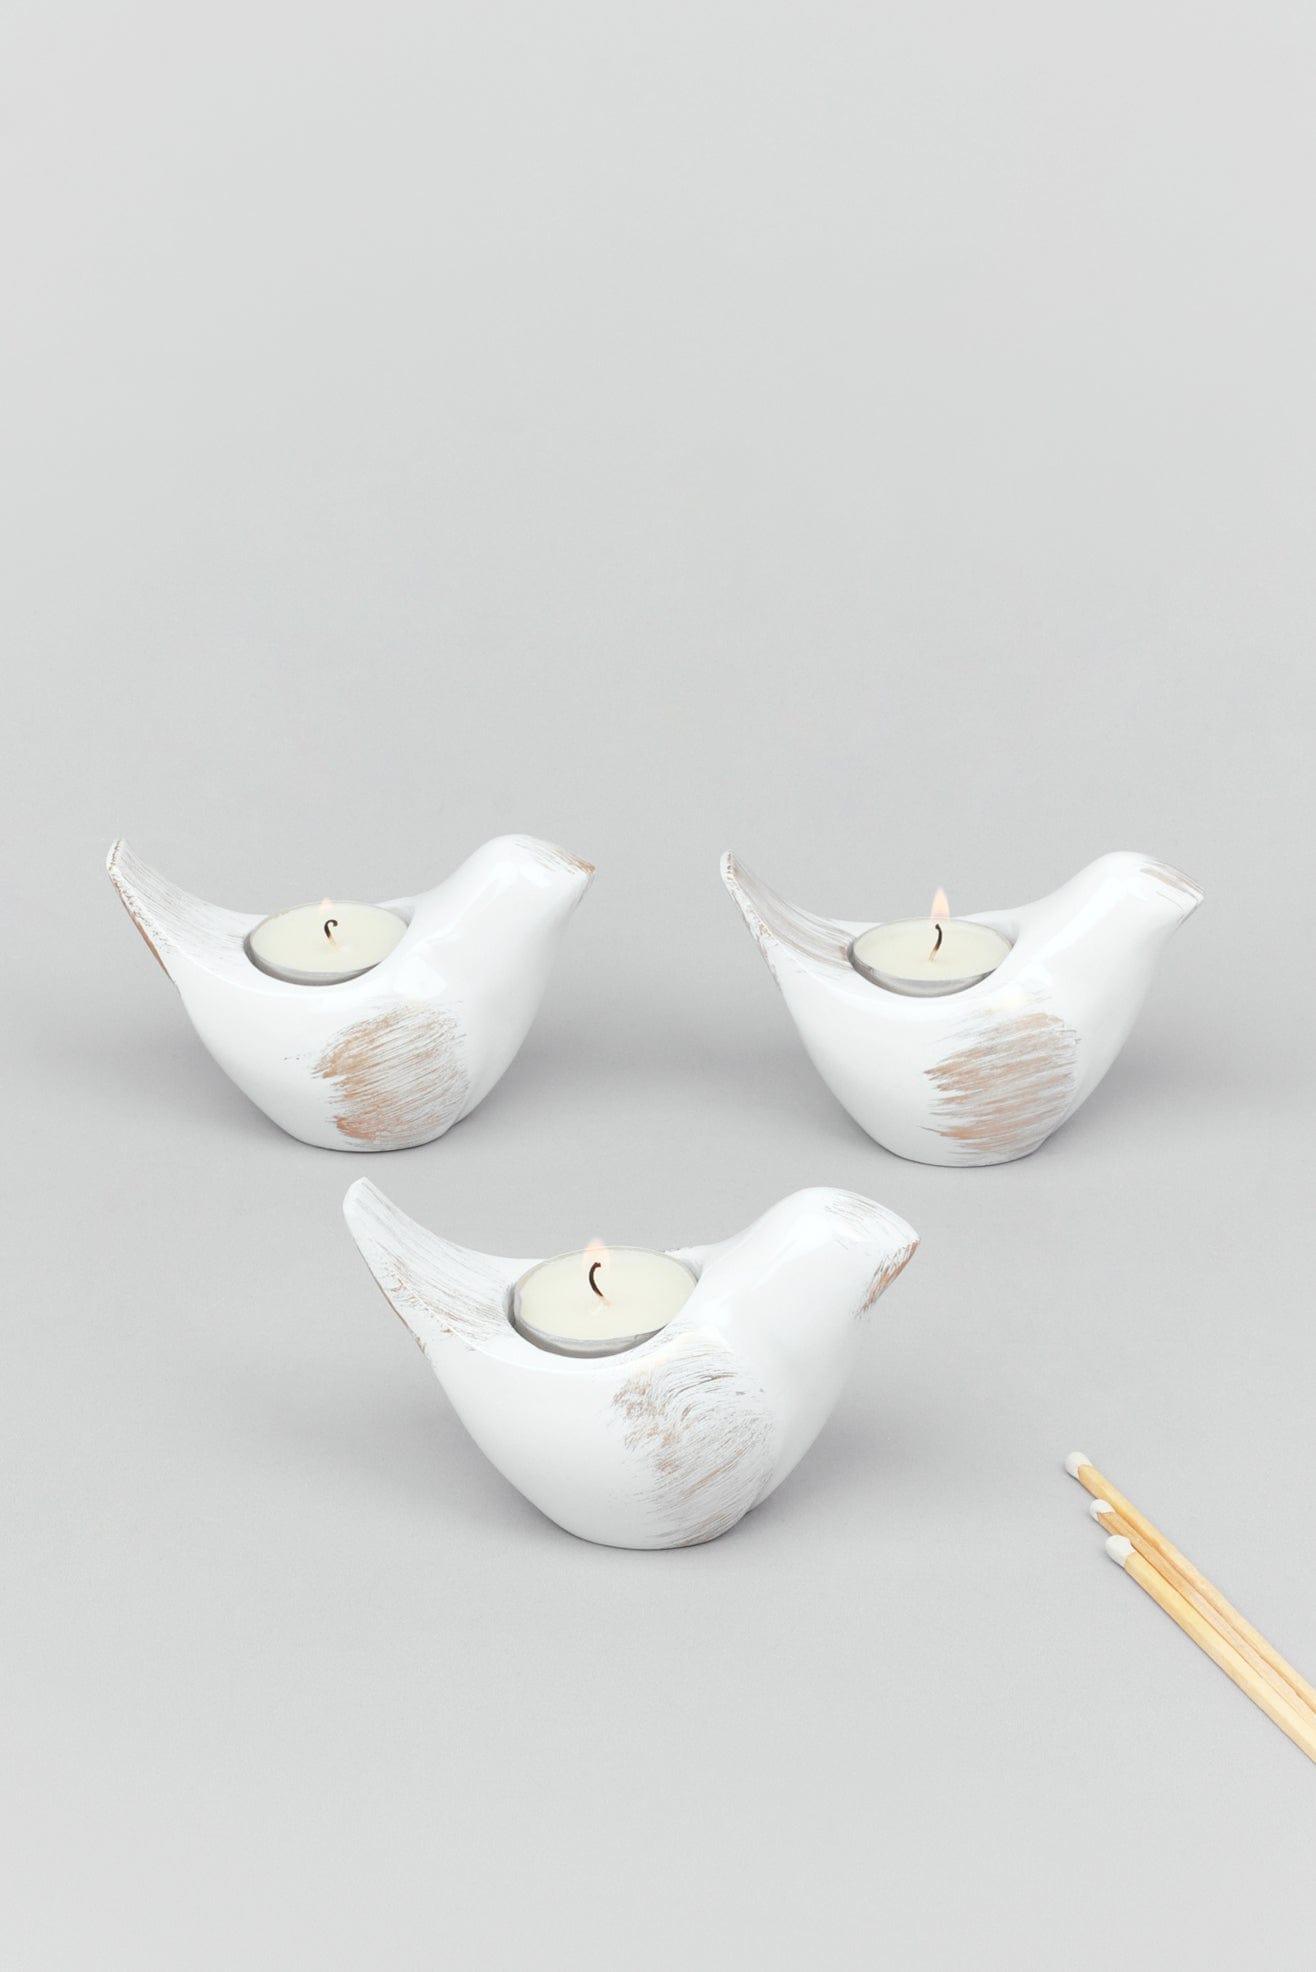 G Decor Candles & Candle Holders Set of Three Set of 3 Rustic Ceramic Pigeon Tealight Holders